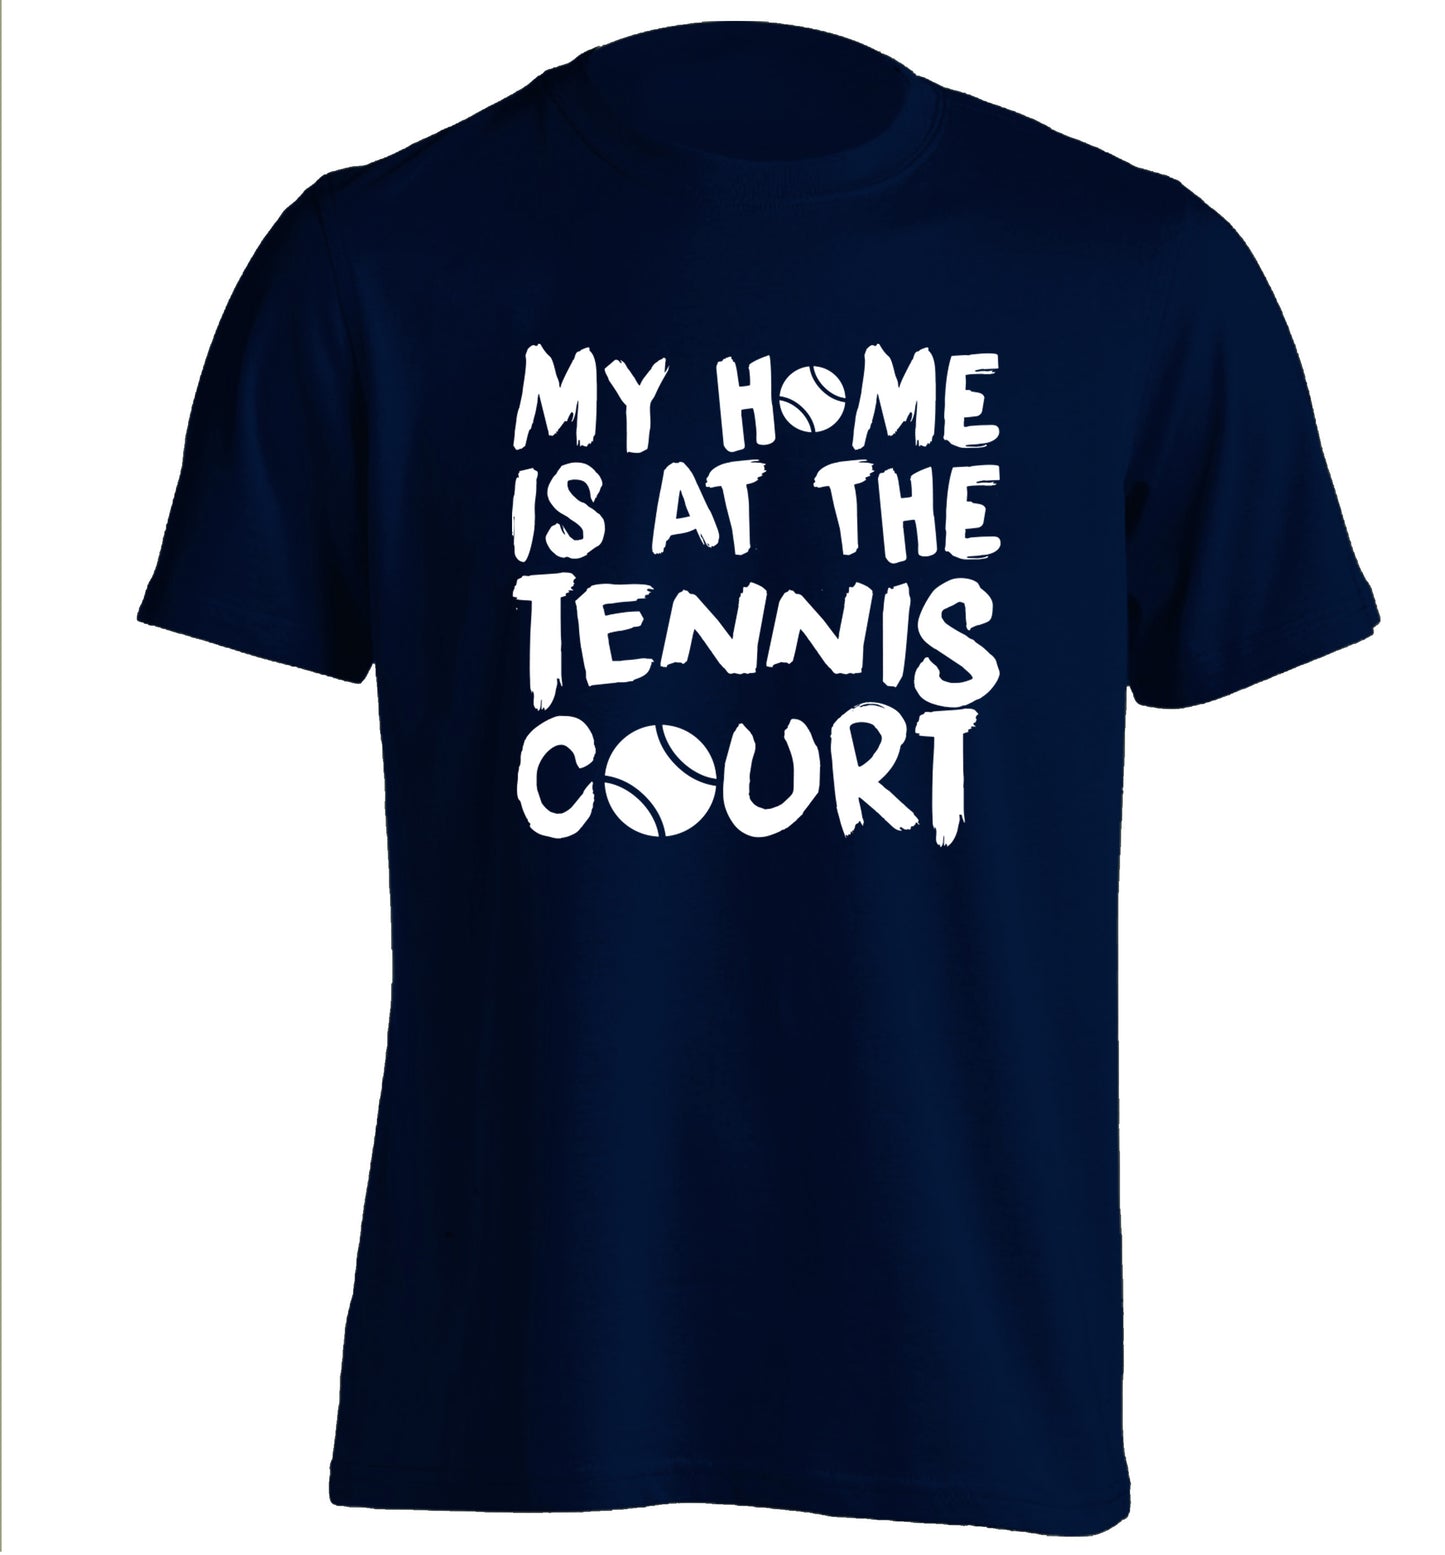 My home is at the tennis court adults unisex navy Tshirt 2XL